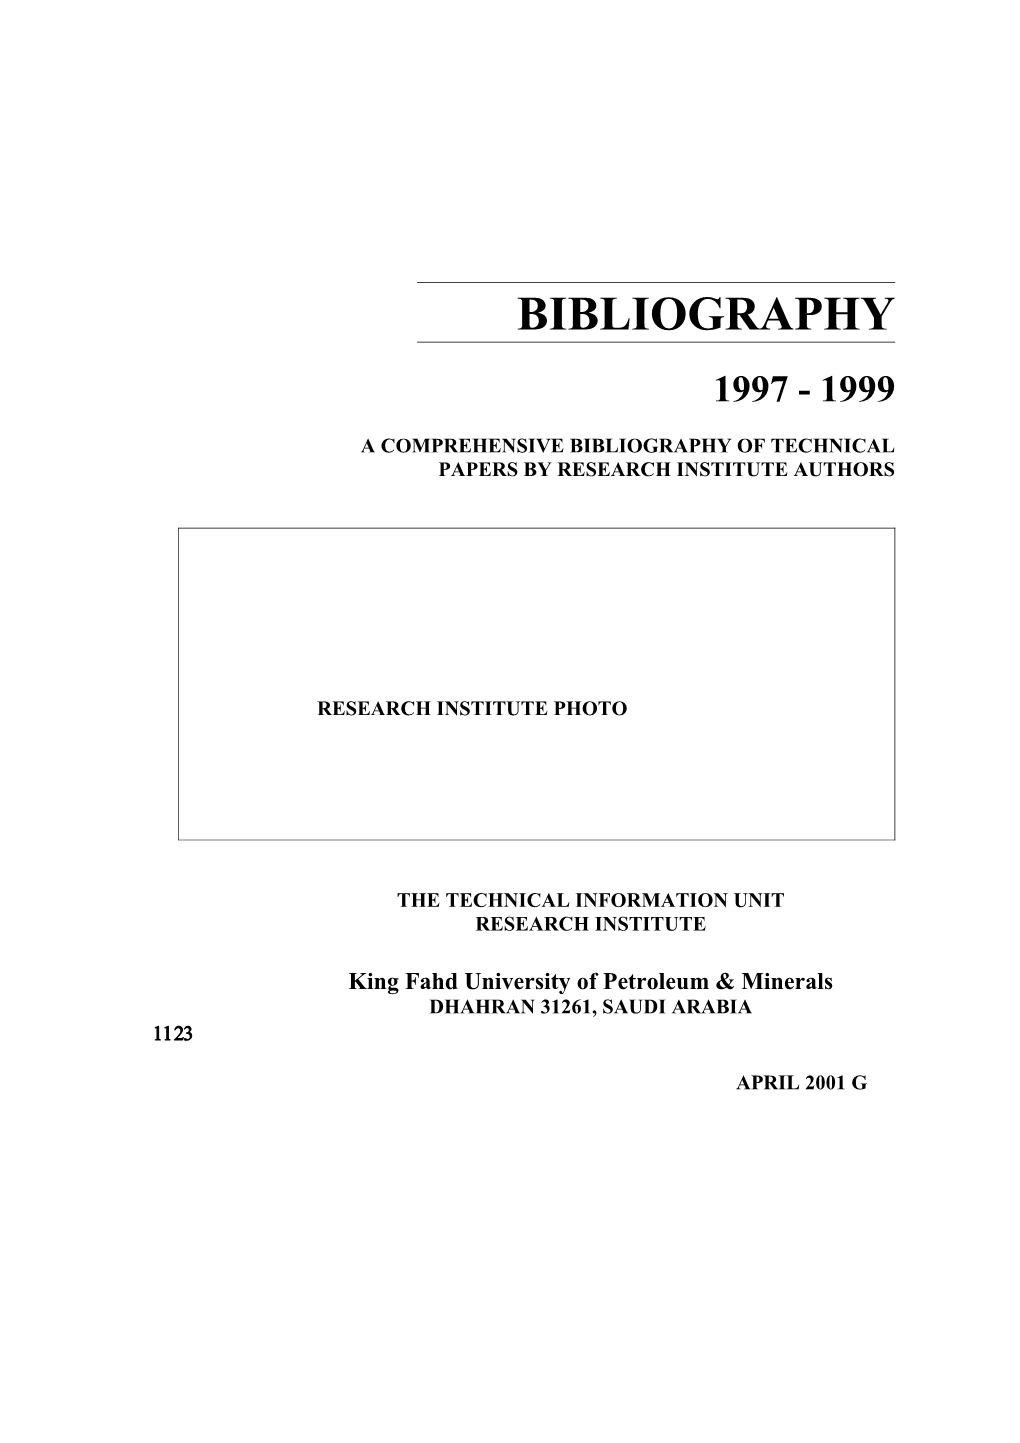 A Comprehensive Bibliography of Technical Papers by Research Institute Authors